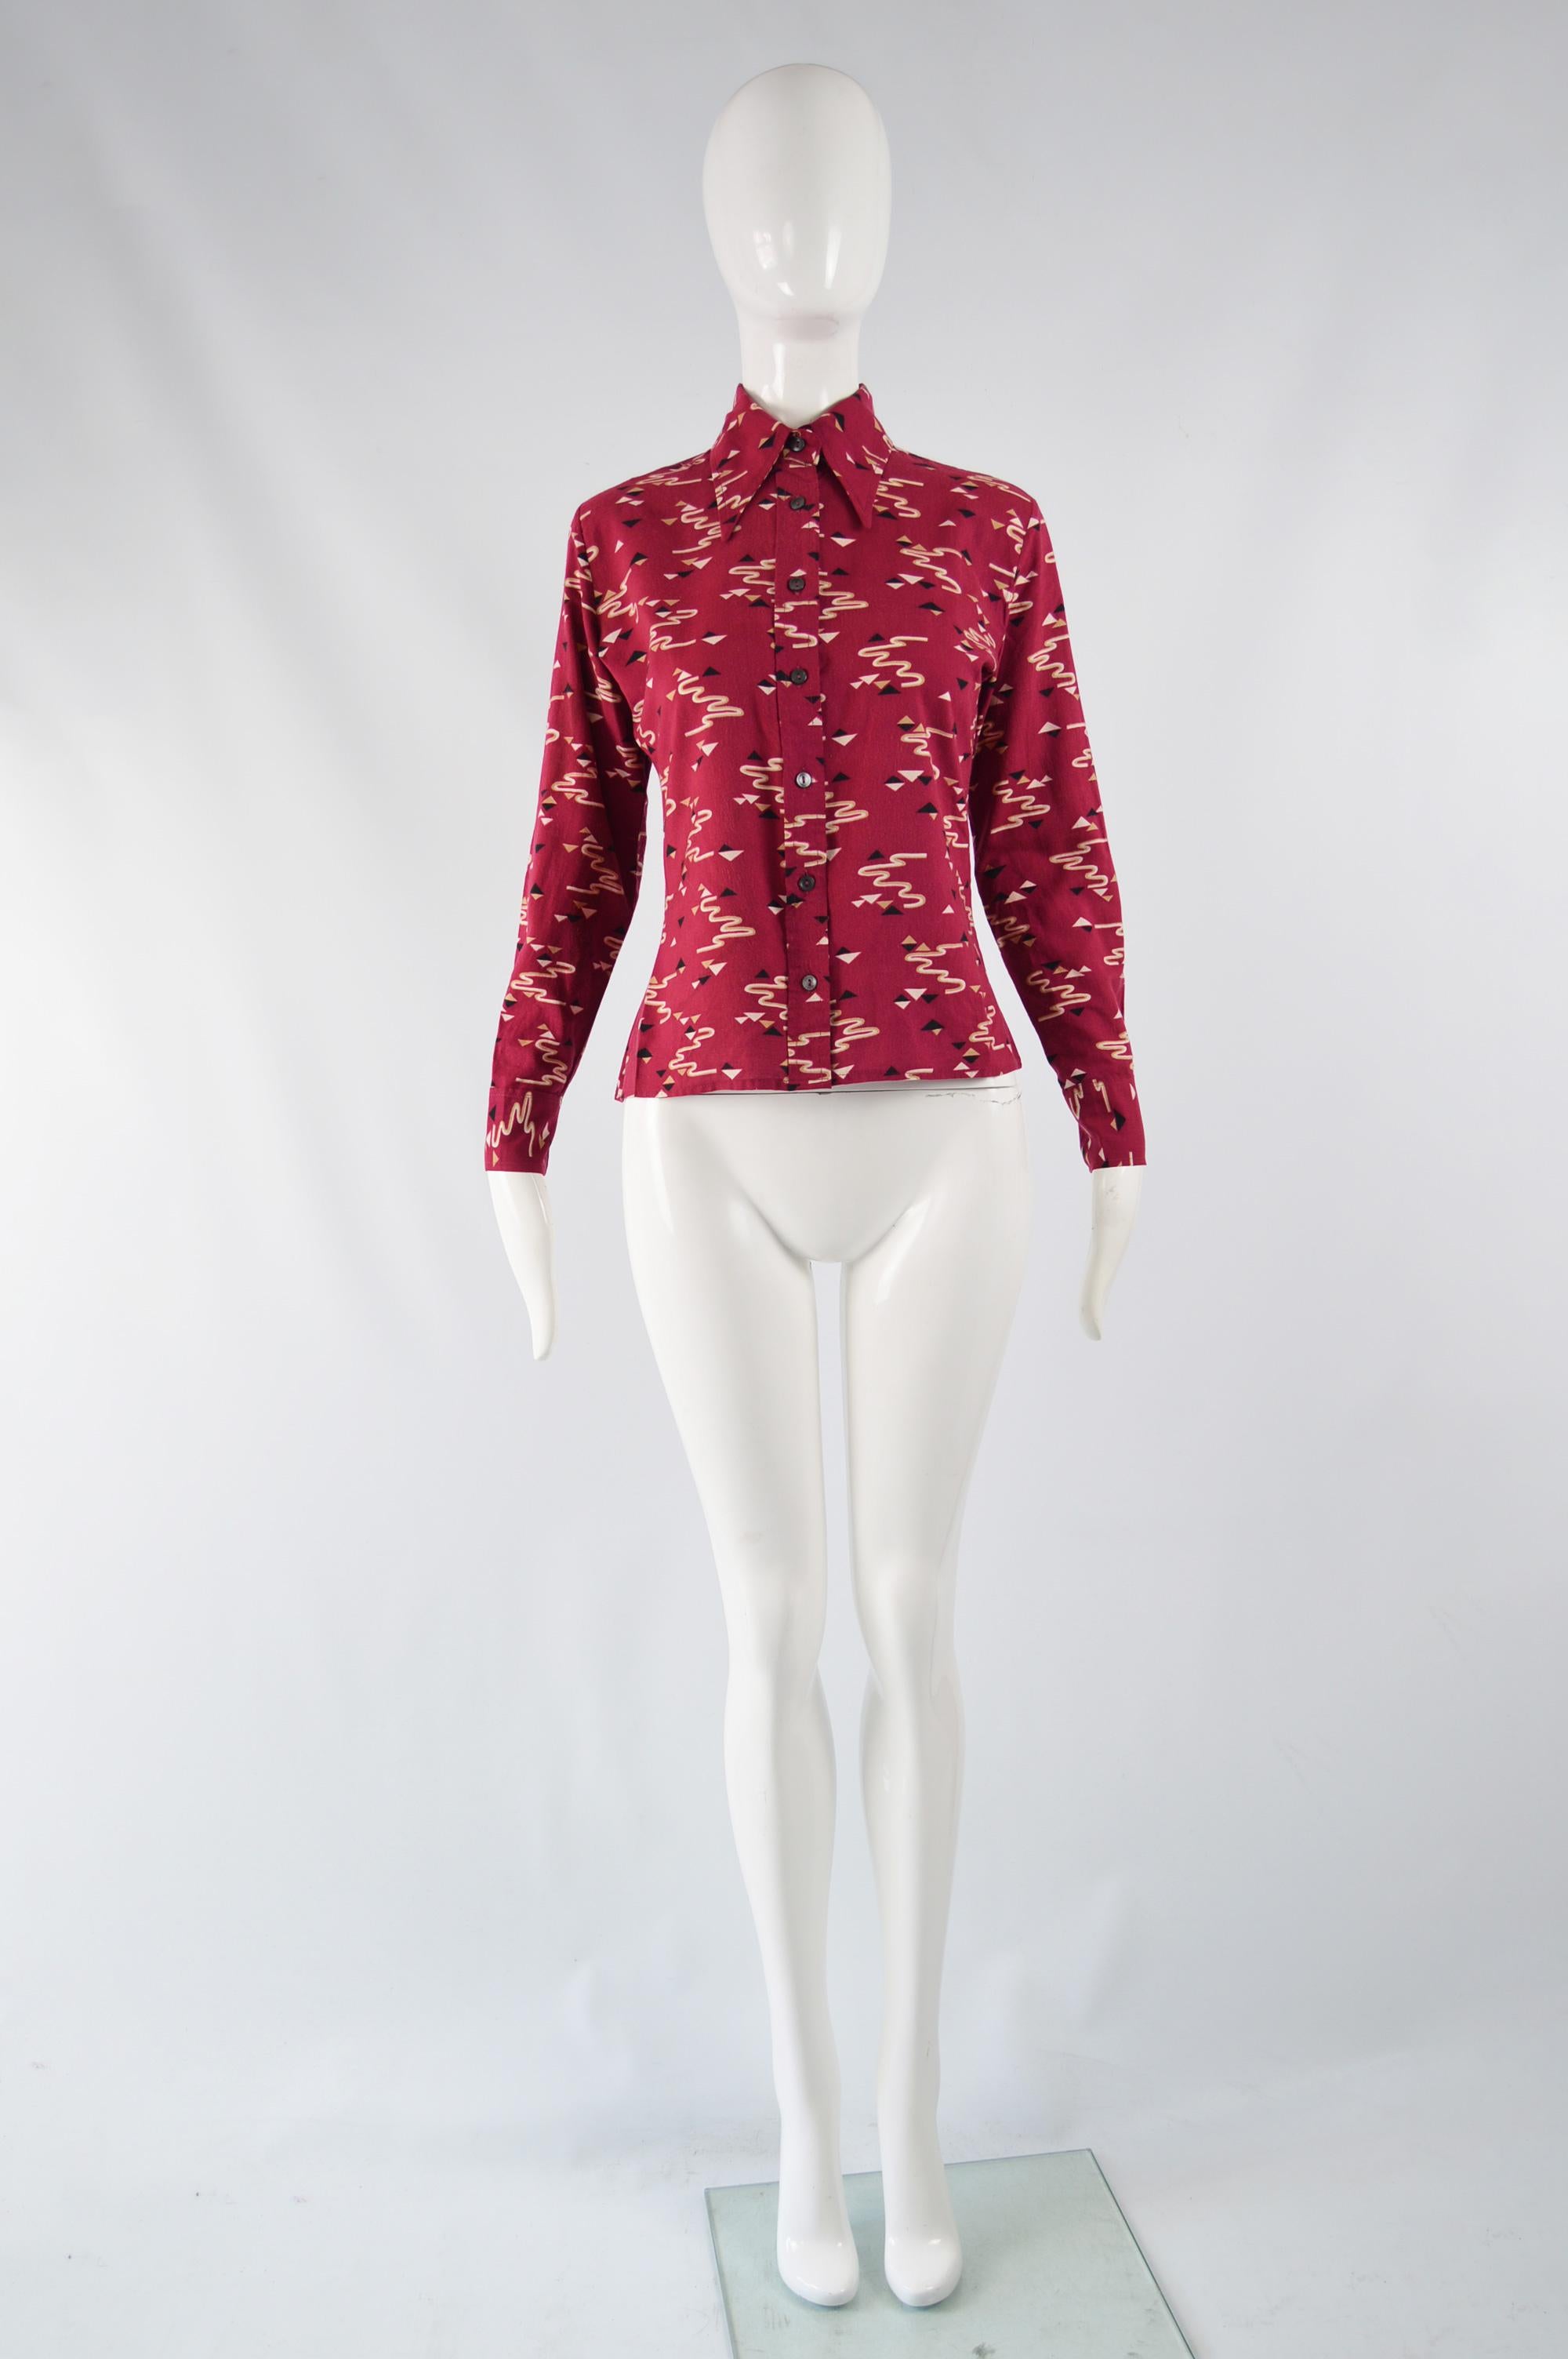 A fabulous vintage women's blouse / shirt by legendary French fashion designer, Pierre Cardin. In a red acrylic knit with Cardin's famous love of geometric shapes shown through the futuristic pattern and long, pointed collar. It has a slim fit and